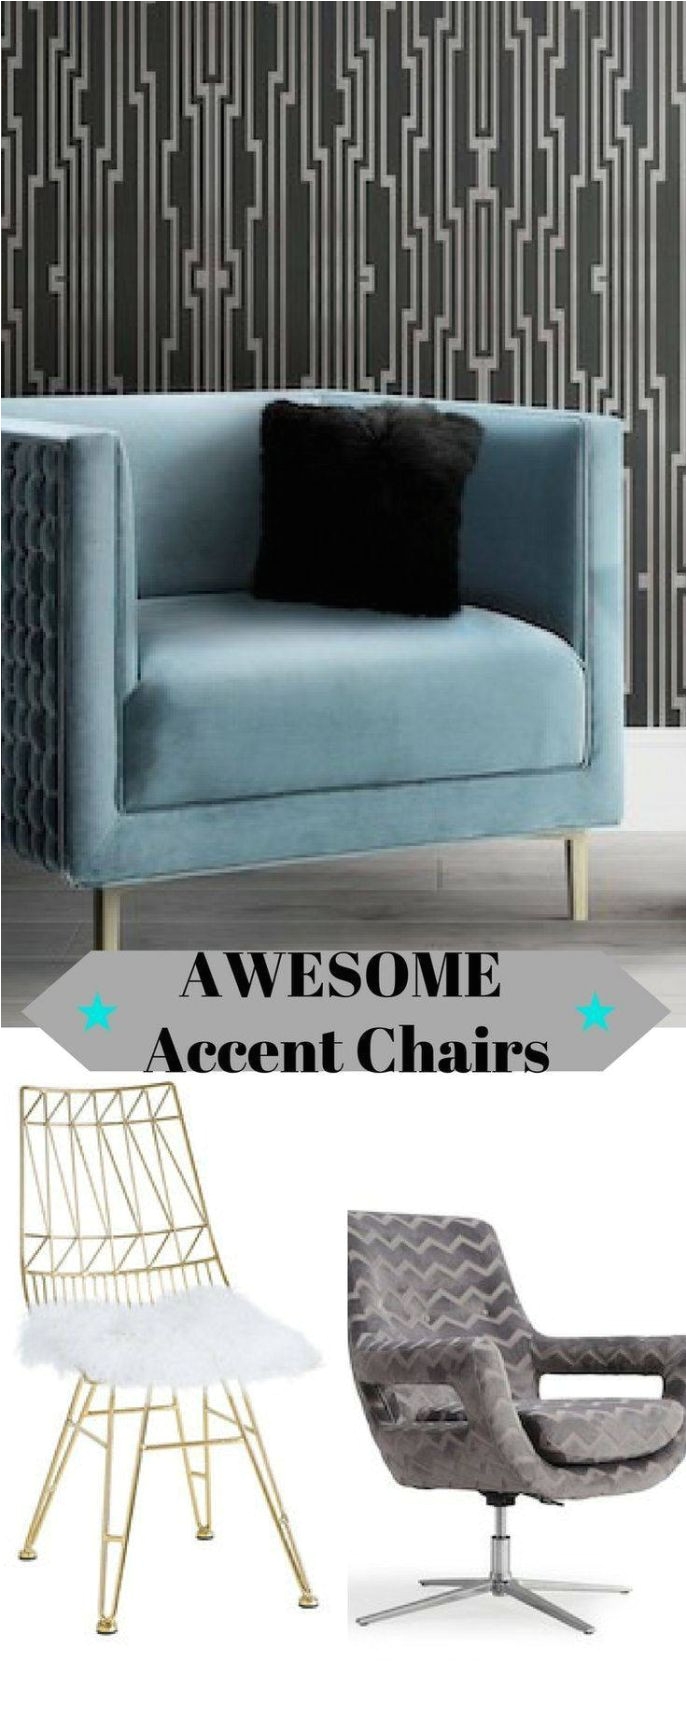 Slumberland Accent Chairs Teal Patterned Accent Chair Fresh 13 Best Please Be Seated Images On